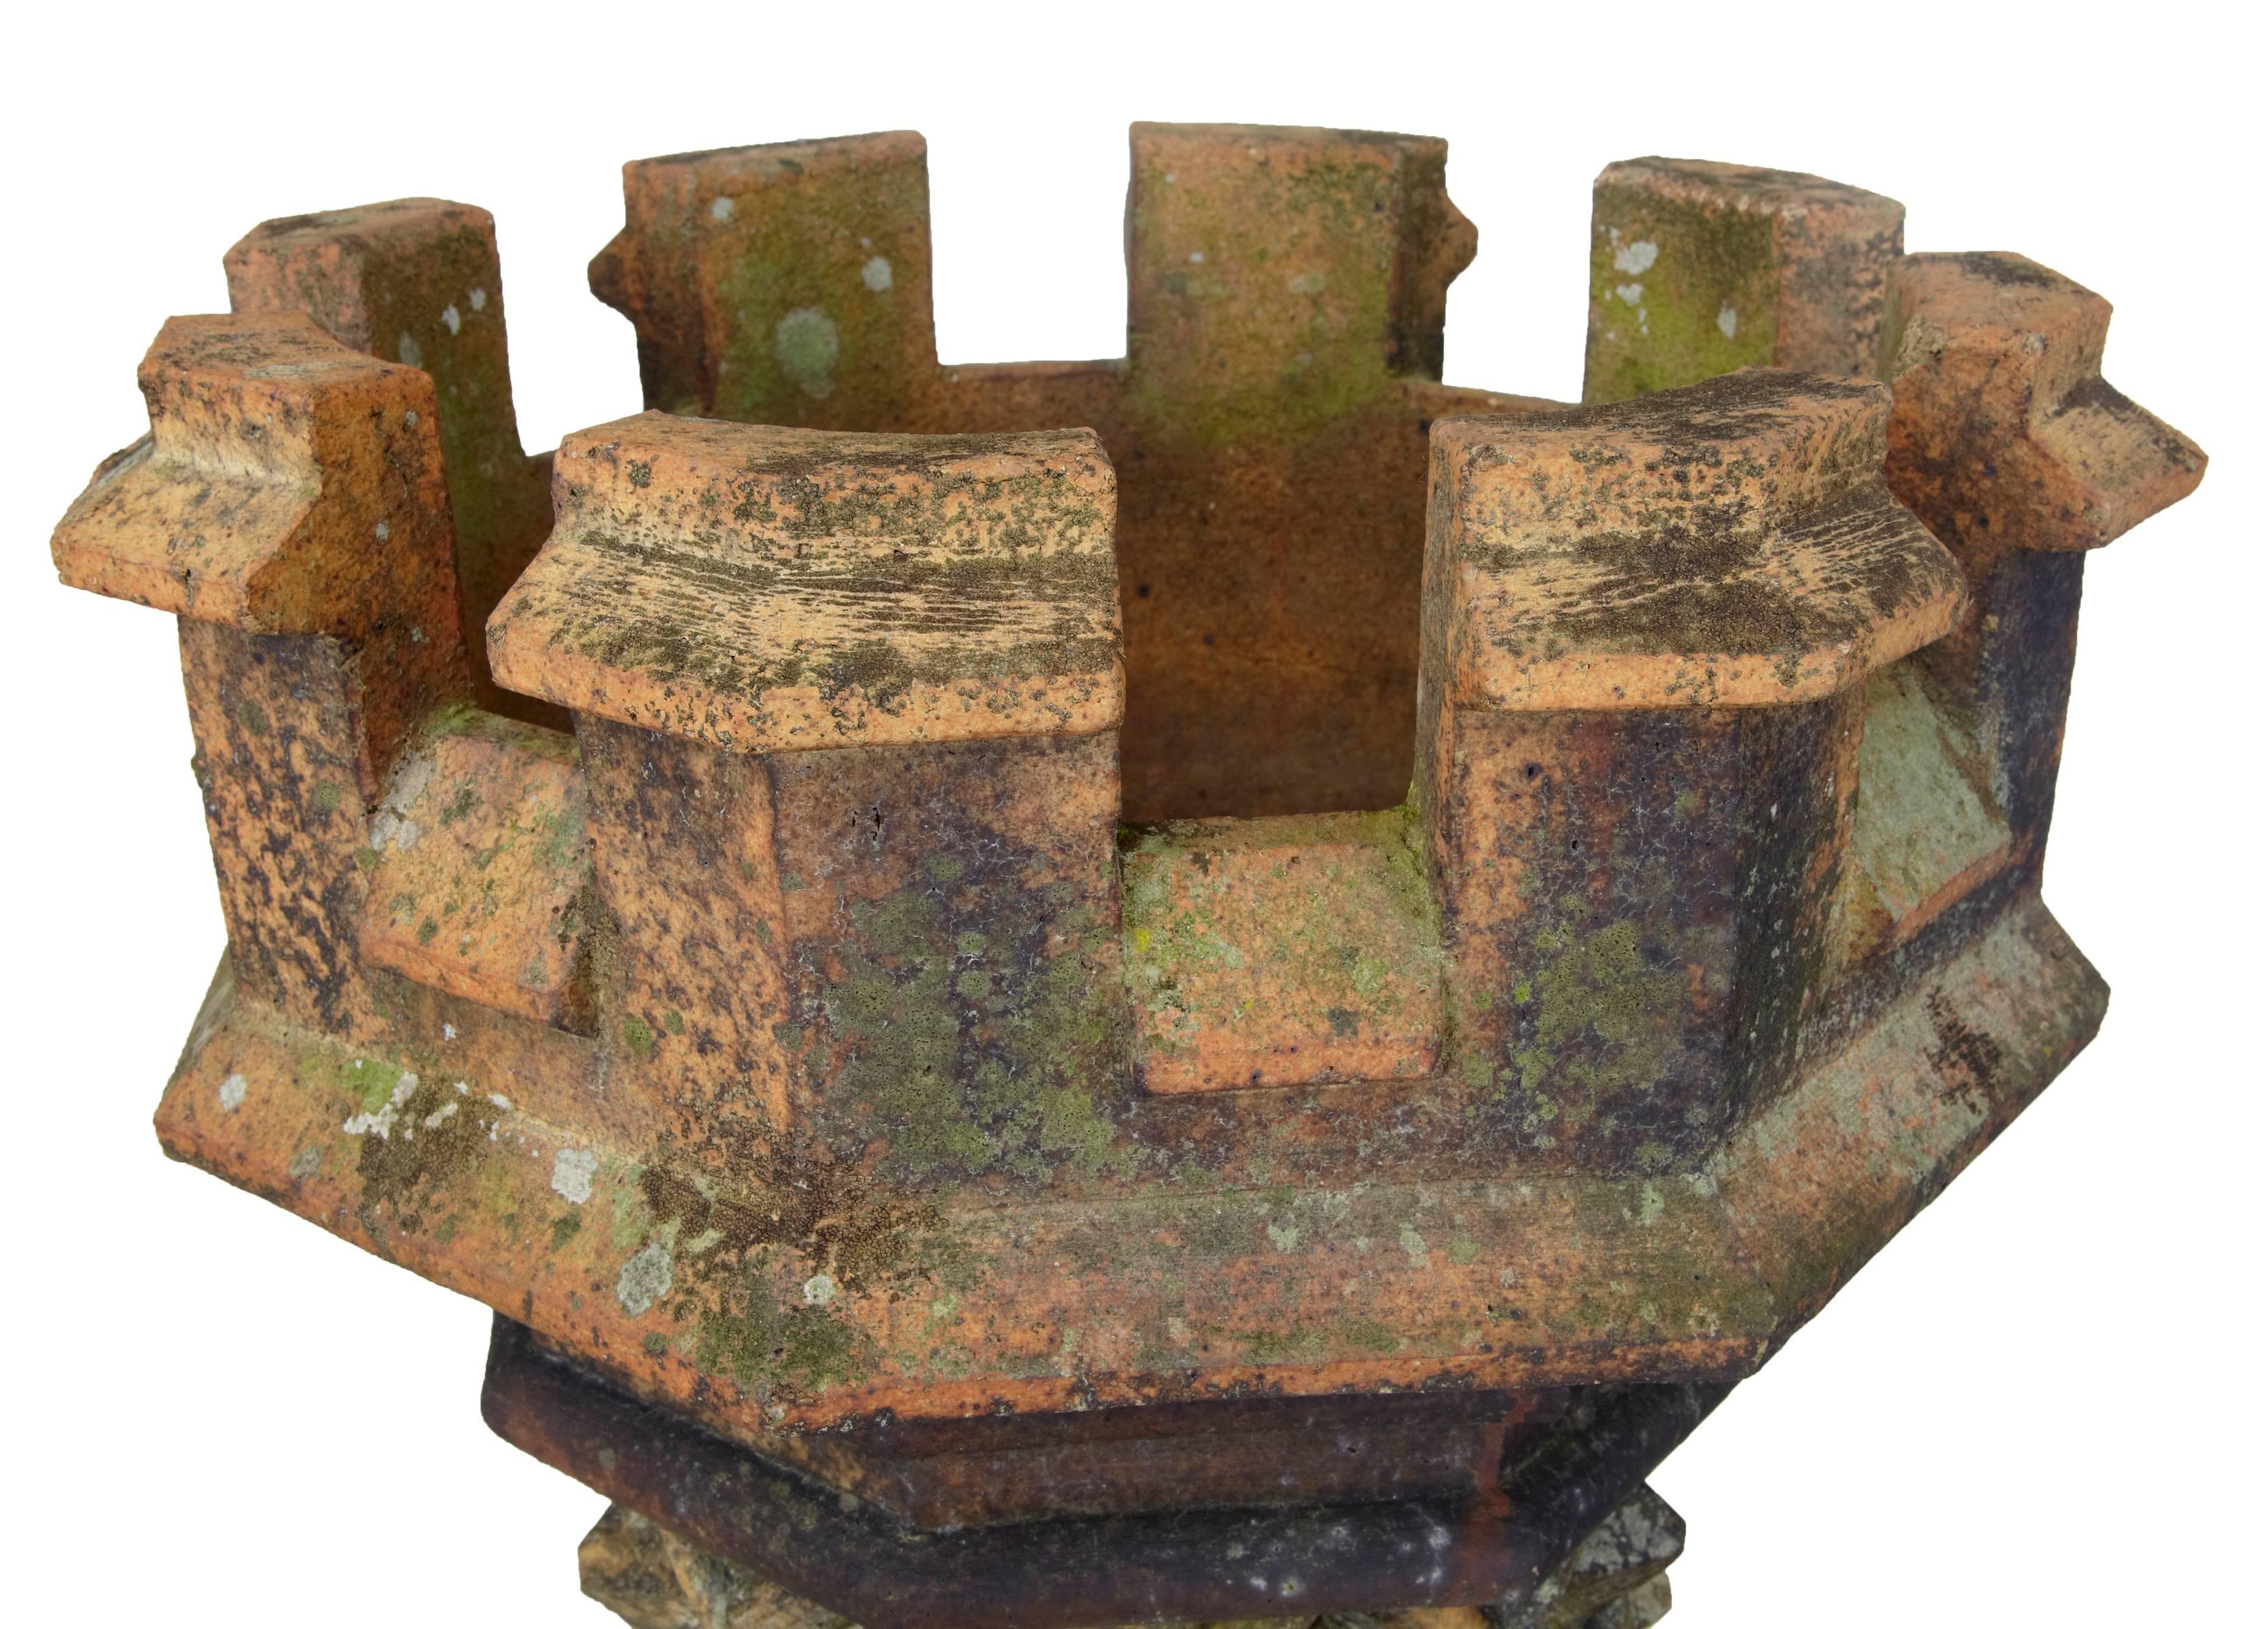 Fantastic near pair of ceramic Gothic chimney pots of large proportions, circa 1880.
We offer opportunity to own these fine architectural items, which are in good condition for age with just minor losses.
Slight variation in size.
Both